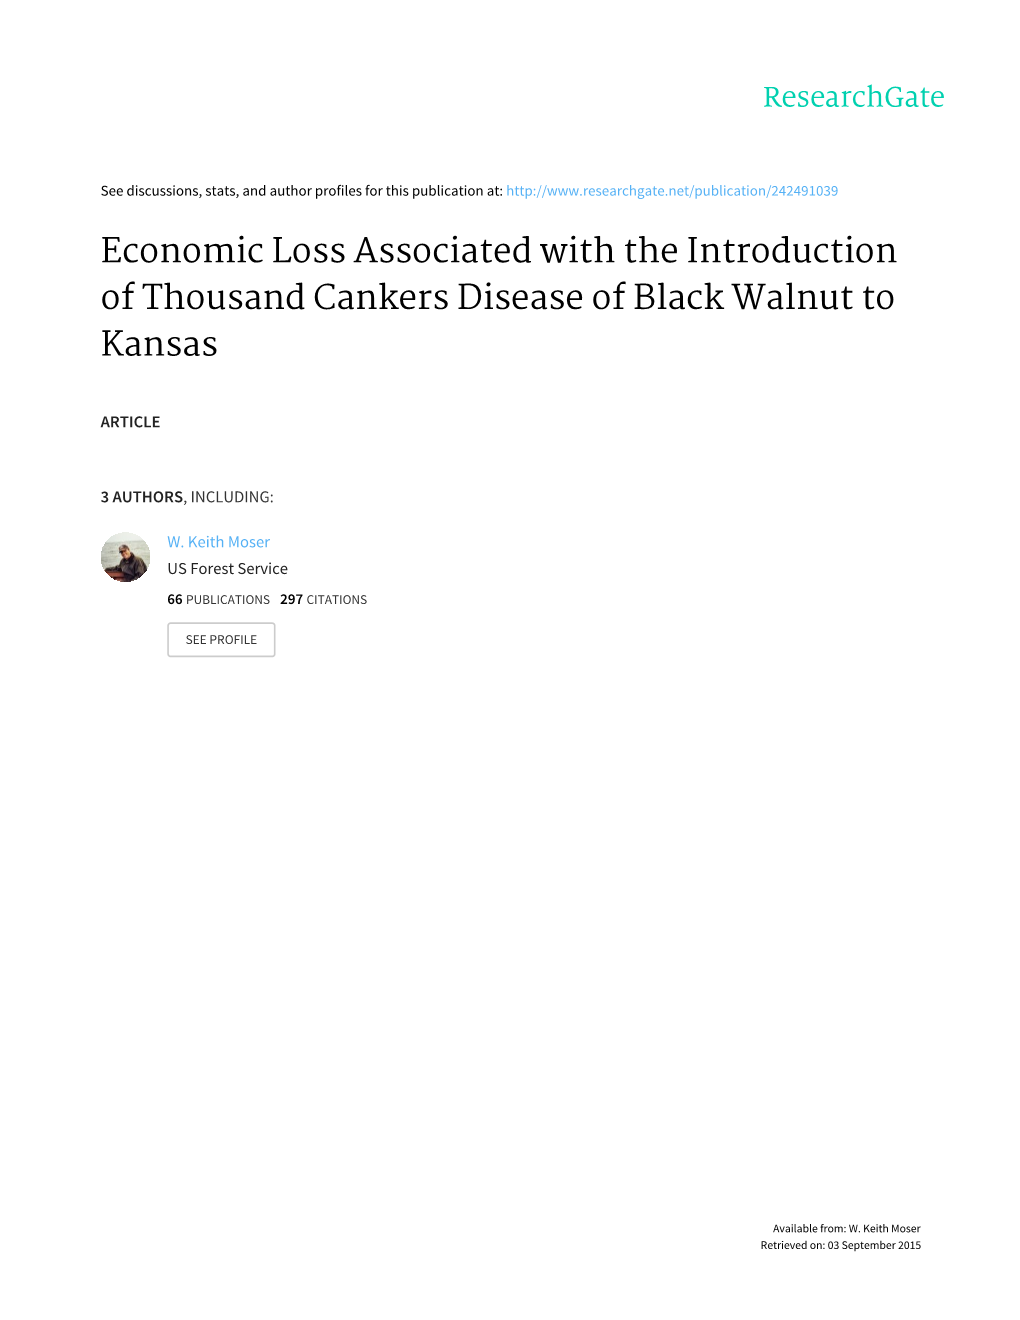 Economic Loss Associated with the Introduction of Thousand Cankers Disease of Black Walnut to Kansas